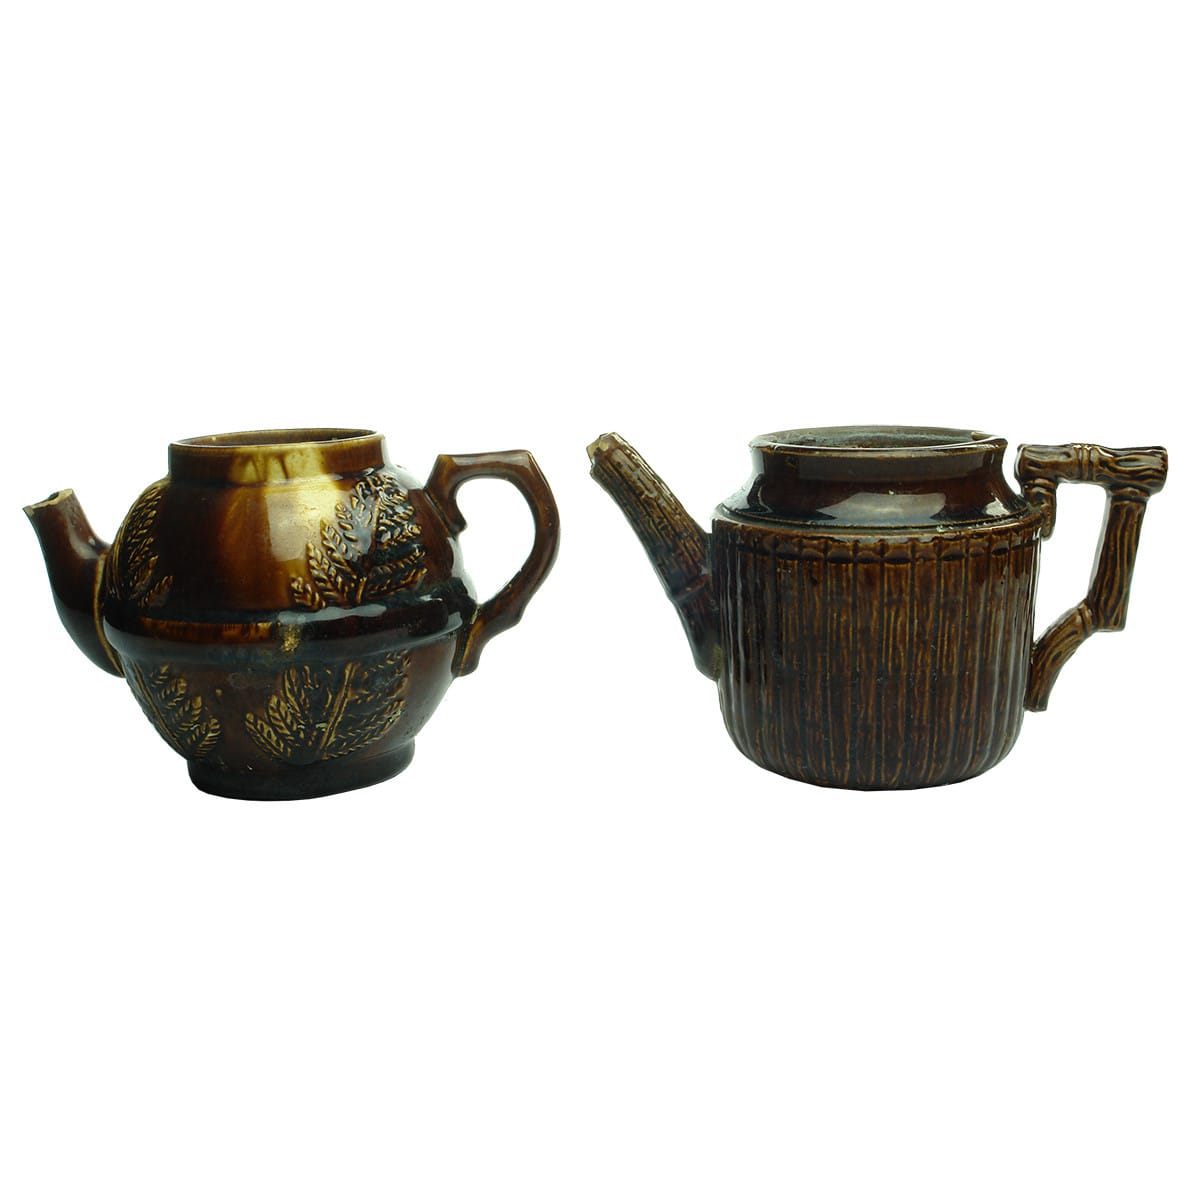 2 Teapots. Fern pattern and Bamboo pattern. Rockingham Glaze. Both about 1 - 2 cup size.